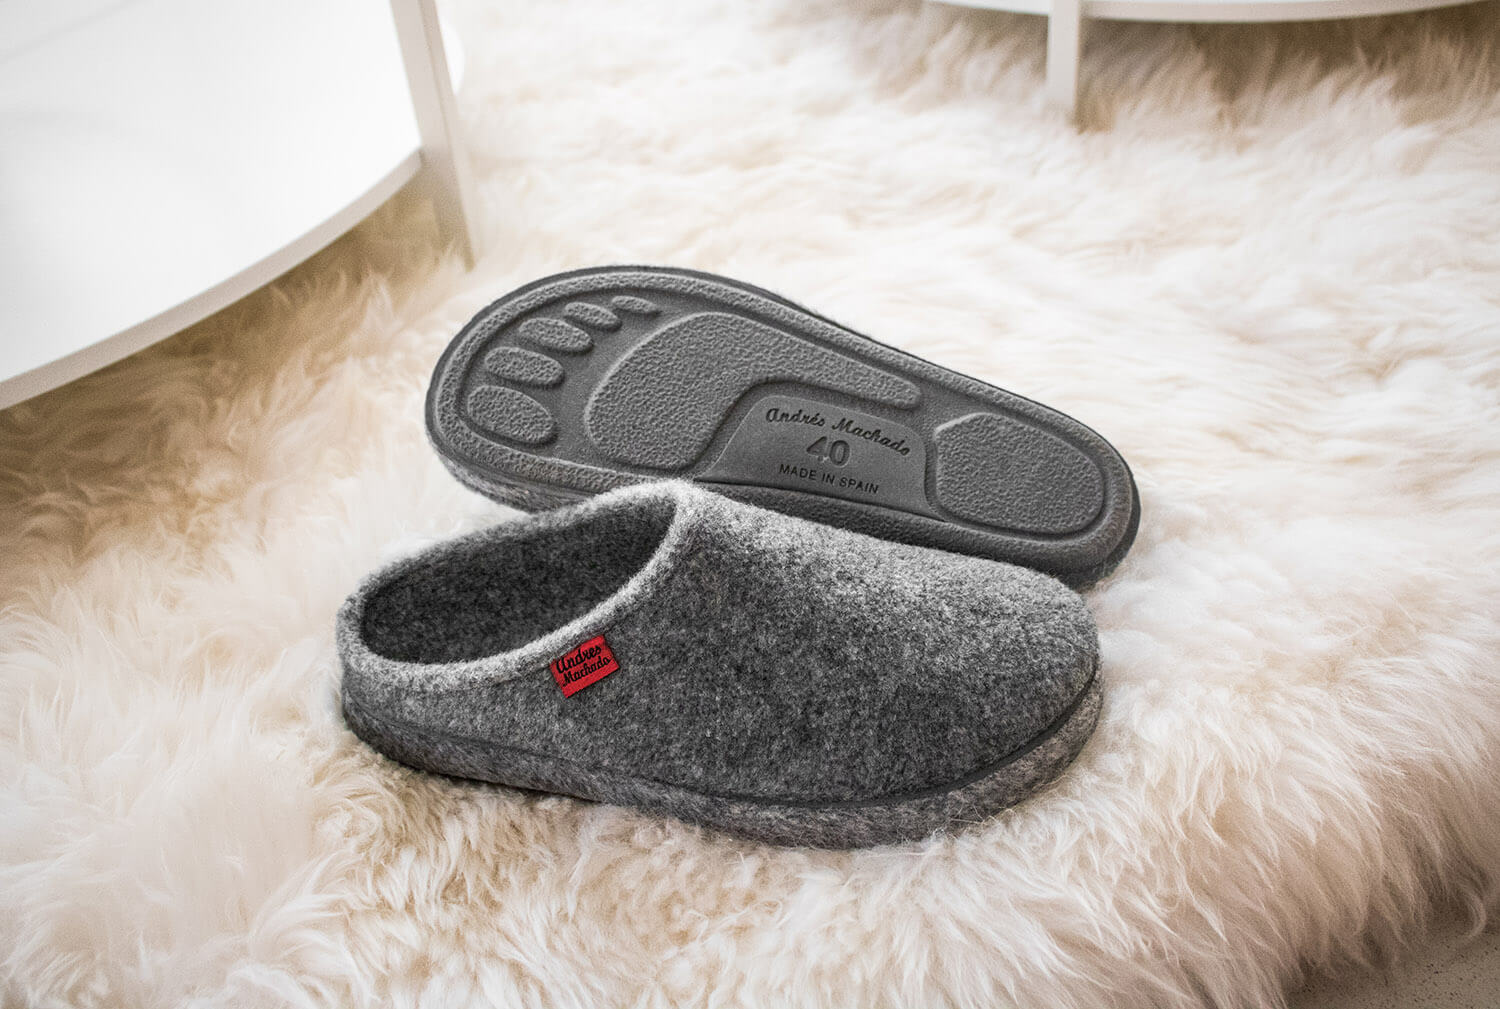 Very comfortable Grey Felt Slippers with footbed 